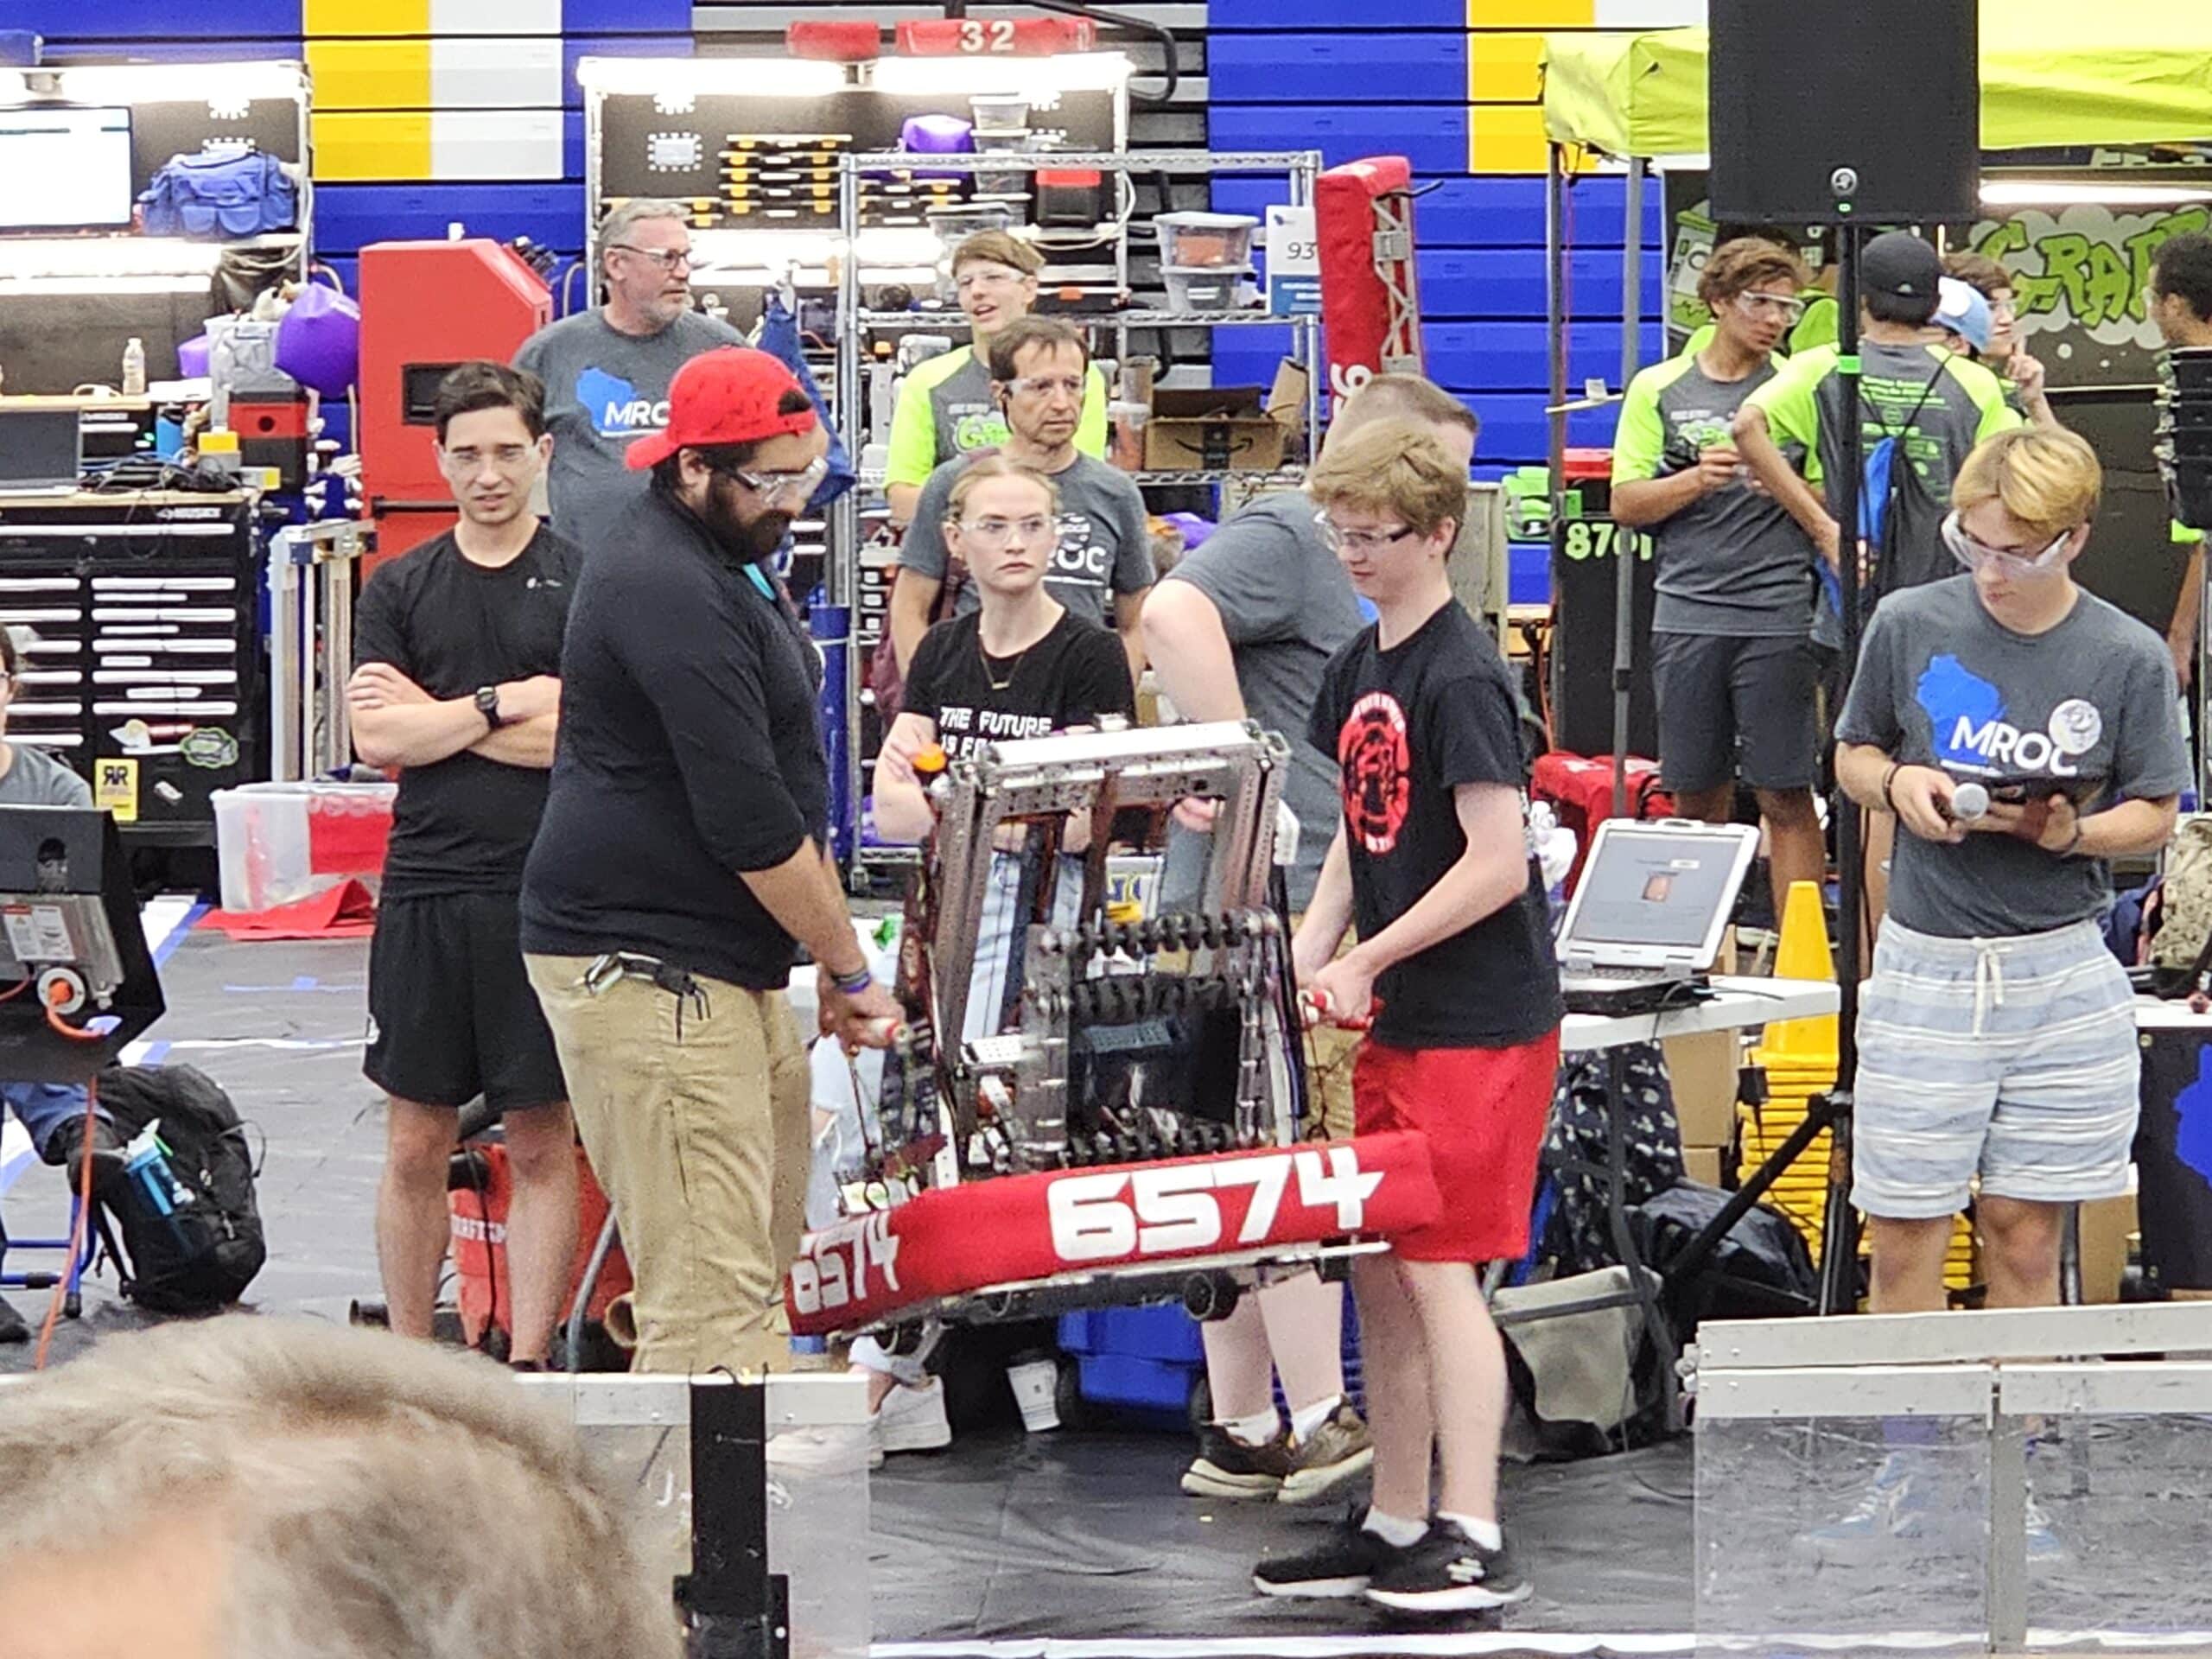 For one fun-only match, the mentors got to drive the robots in a match coached by students